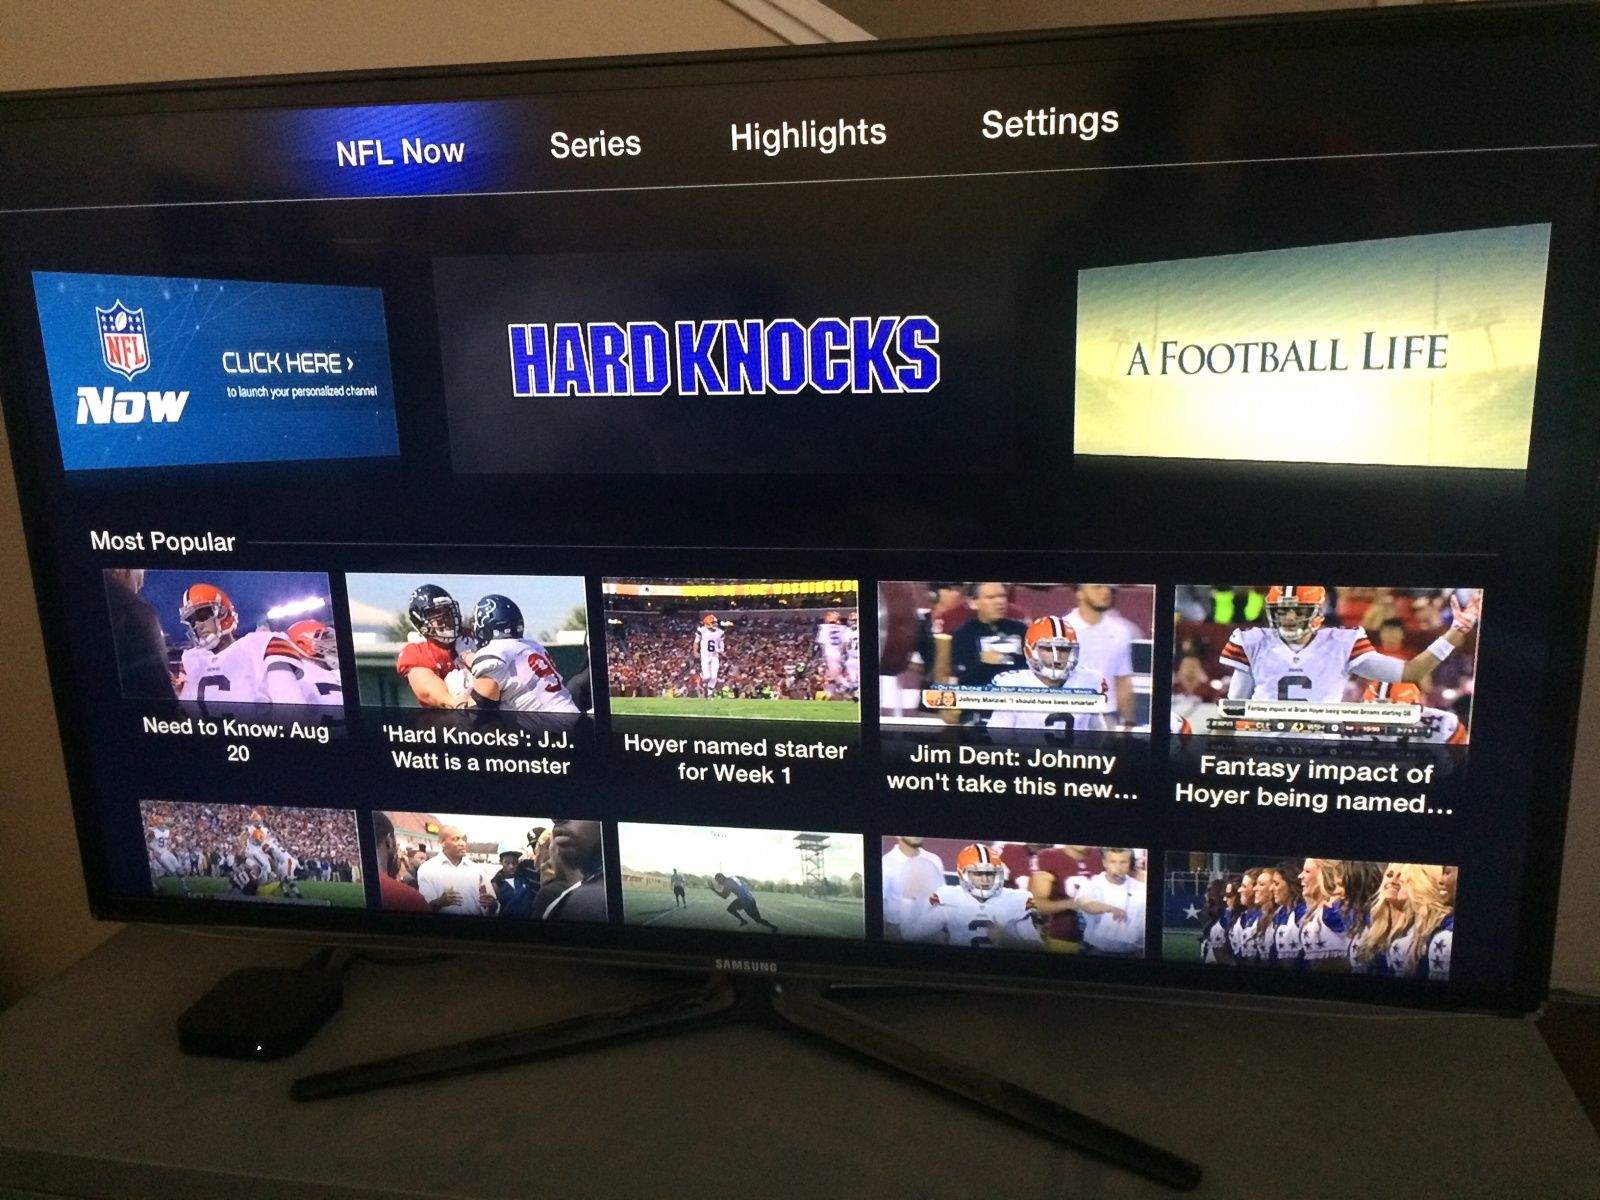 Apple TV adds NFL Now to channel lineup